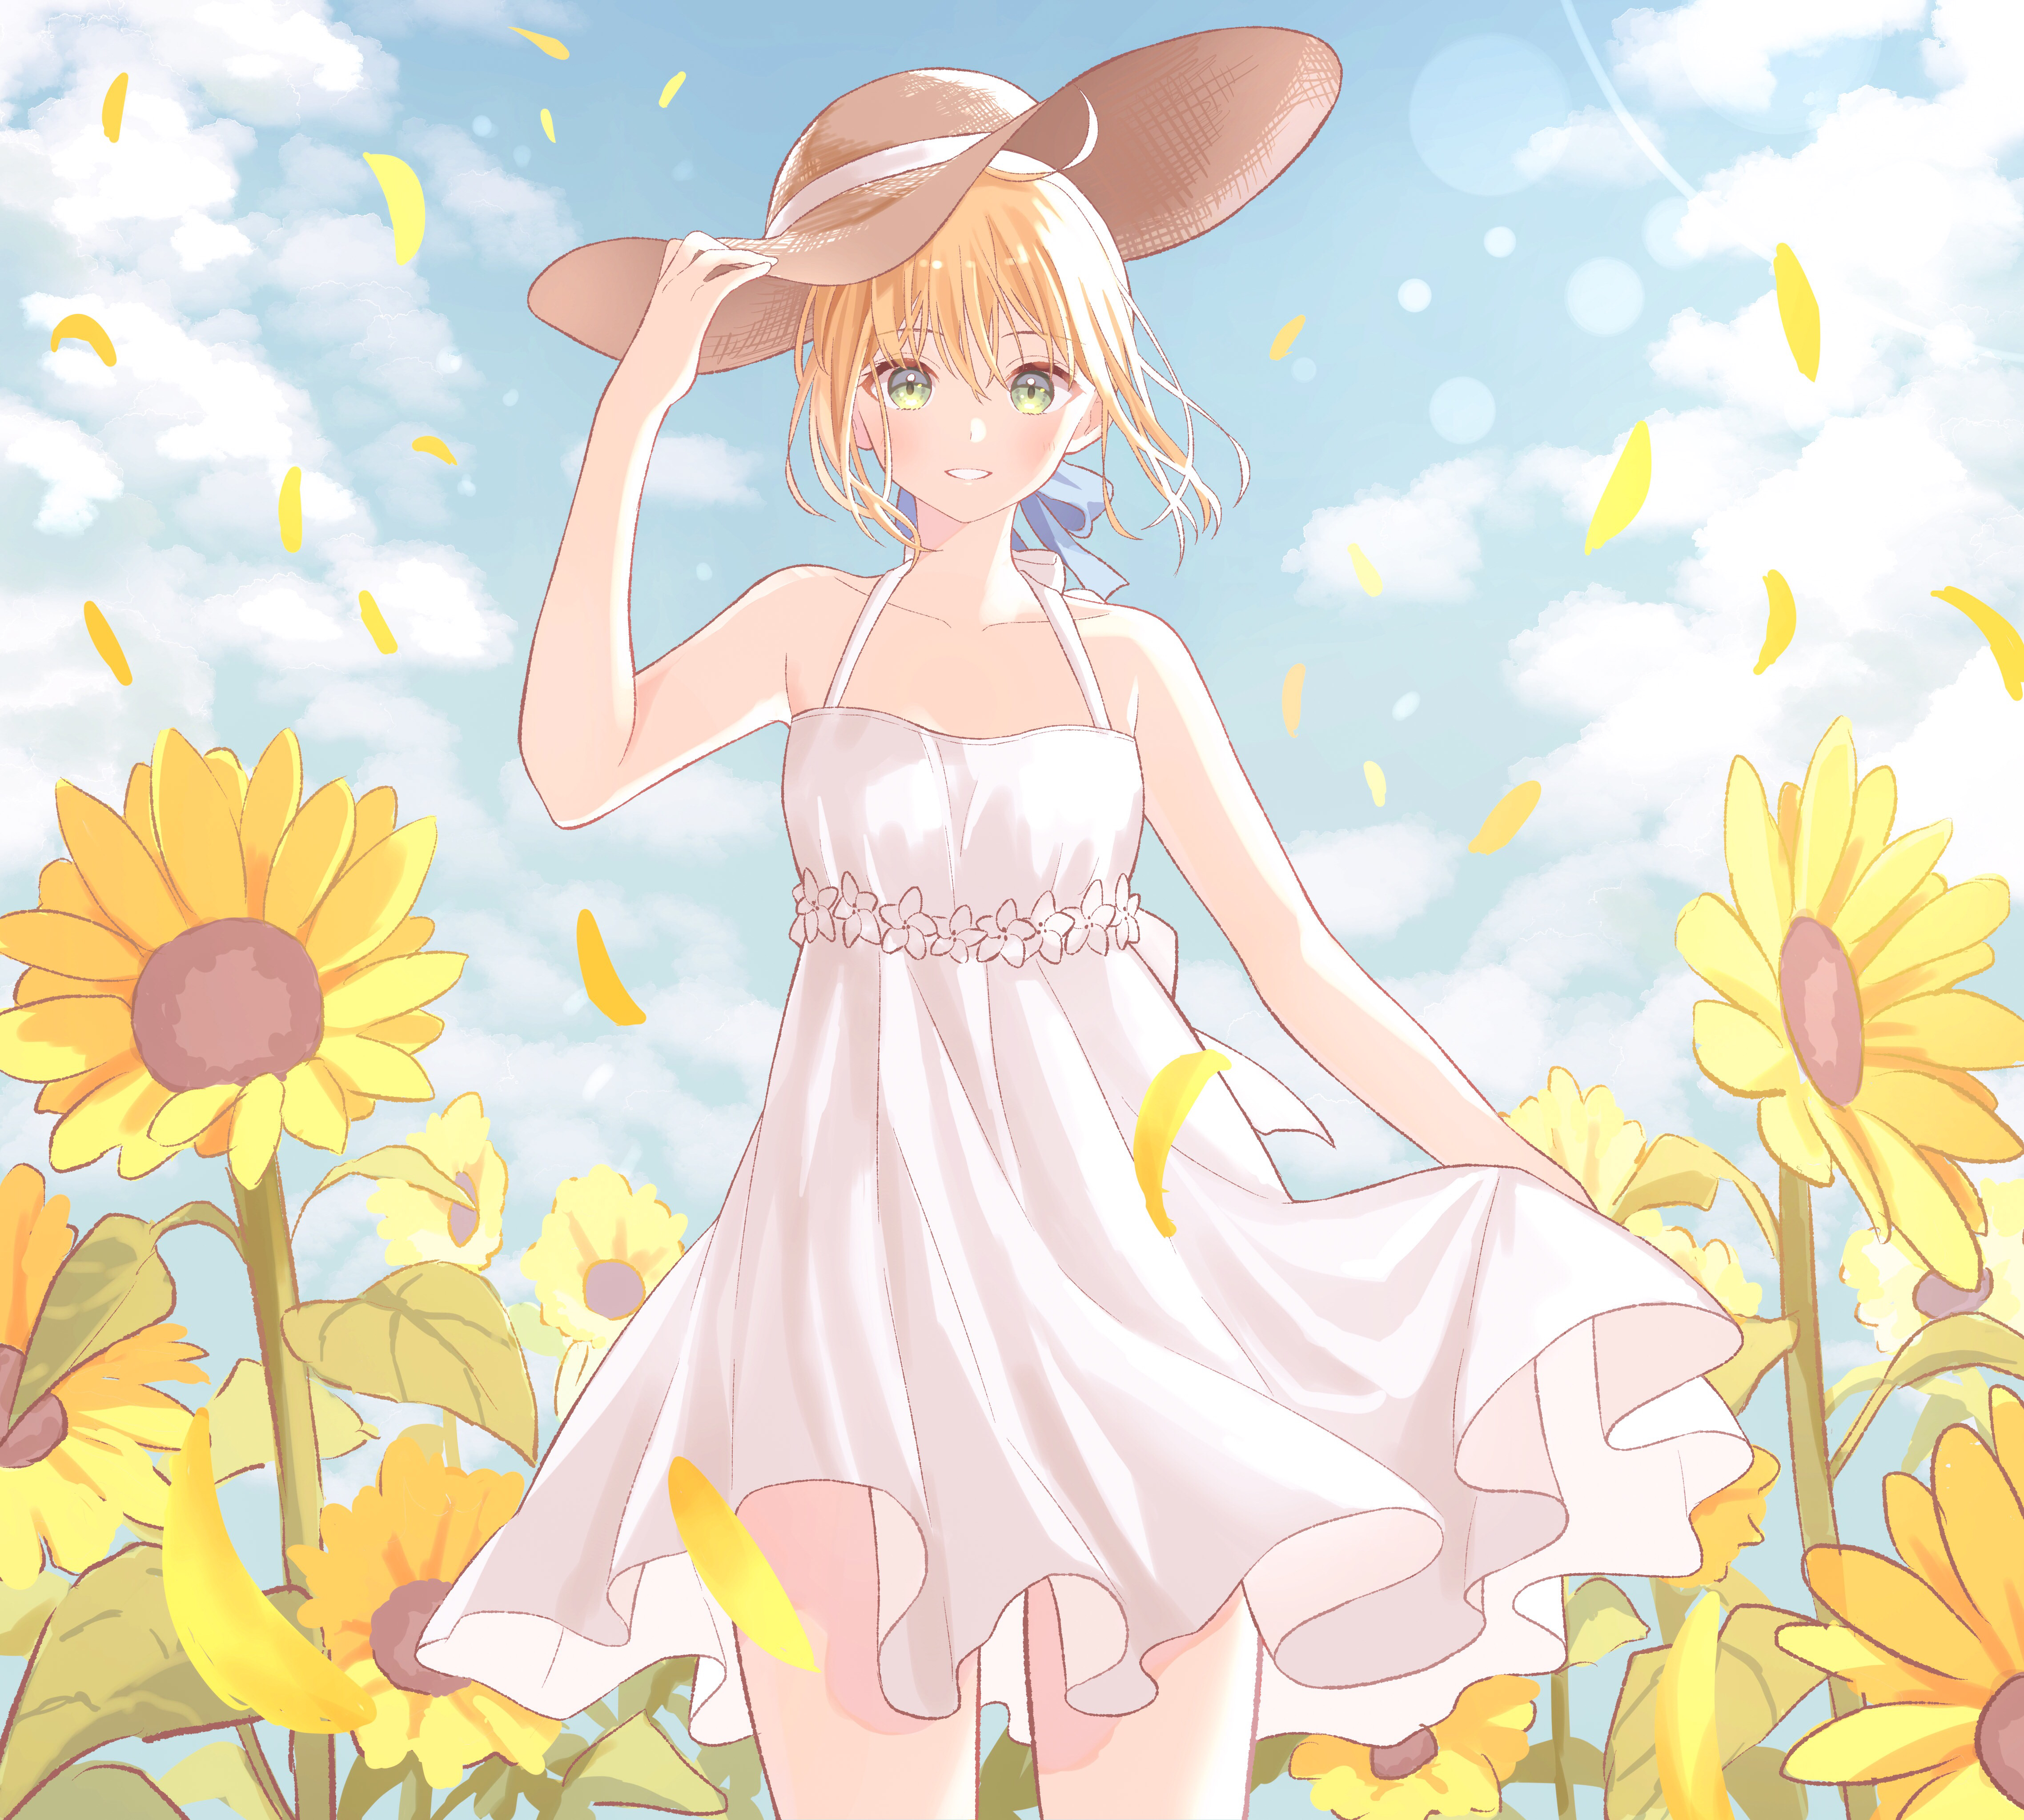 Anime 4552x4093 Fate series Fate/Stay Night anime girls 2D small boobs clear sky thighs white dress no bra smiling Saber green eyes blushing looking at viewer blue ribbons fan art sunflowers anime sun dress blonde Artoria Pendragon